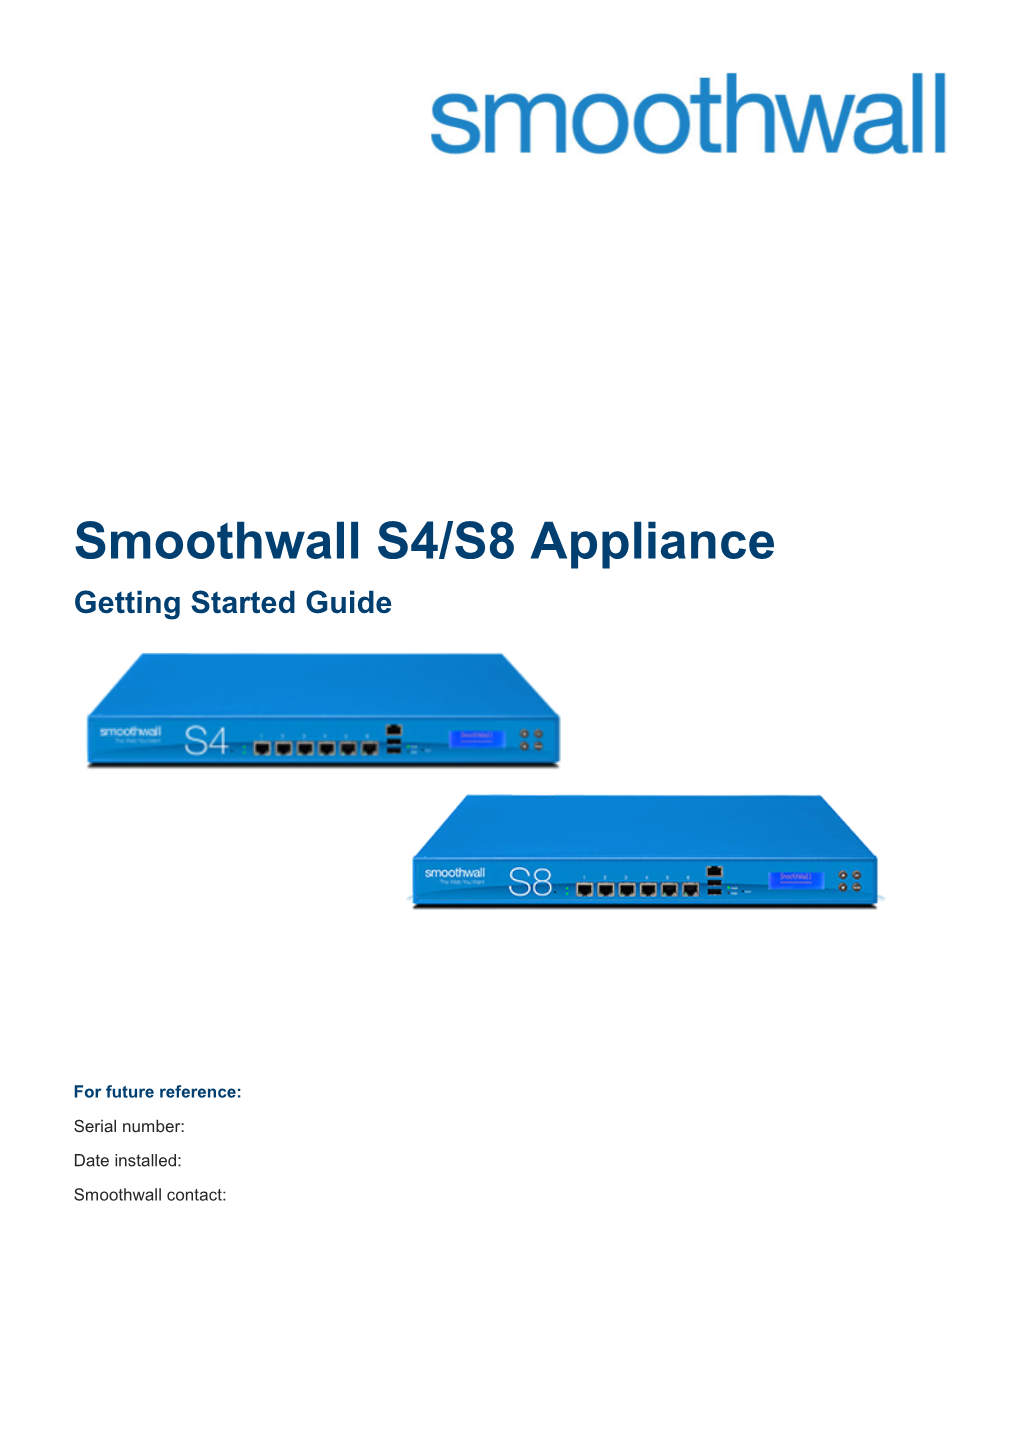 Smoothwall S4/S8 Appliance Getting Started Guide